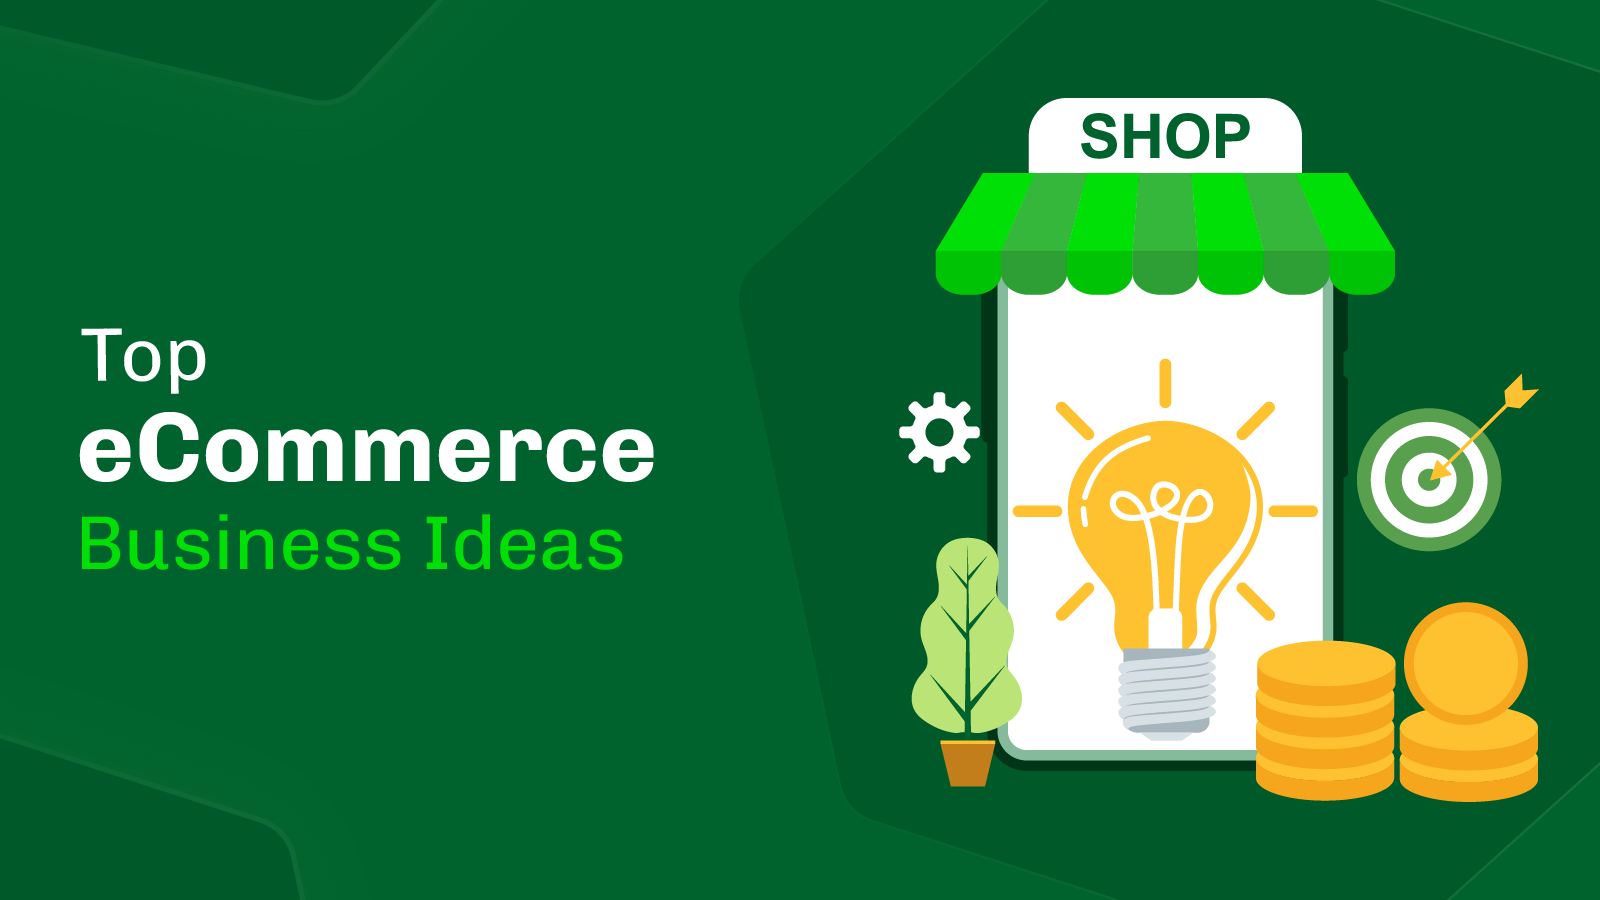 20 Top eCommerce Business Ideas